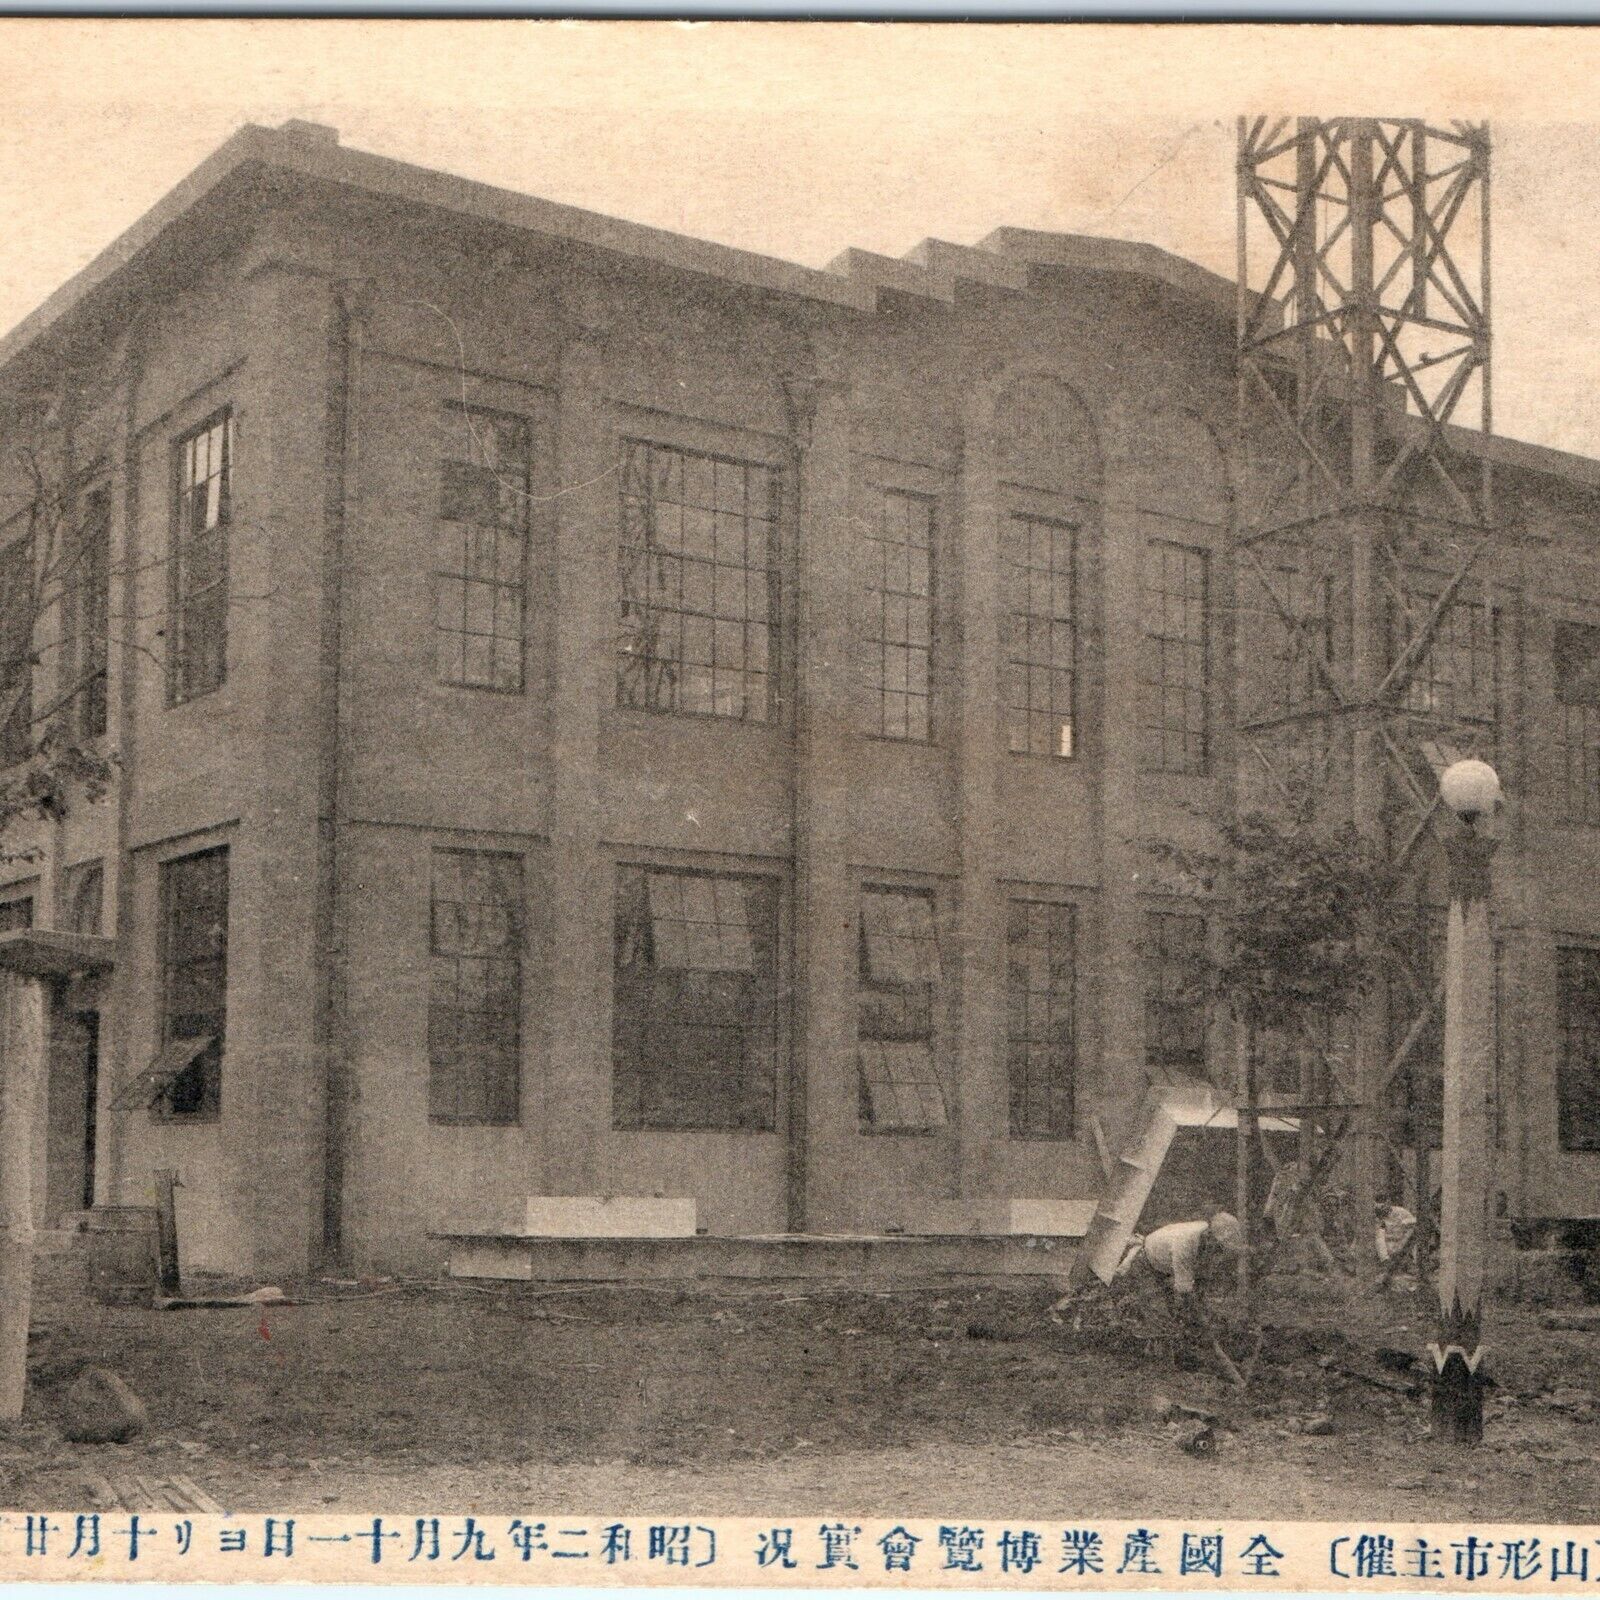 c1940s China / Japan Building Construction Tower Postcard Expo Conference A60